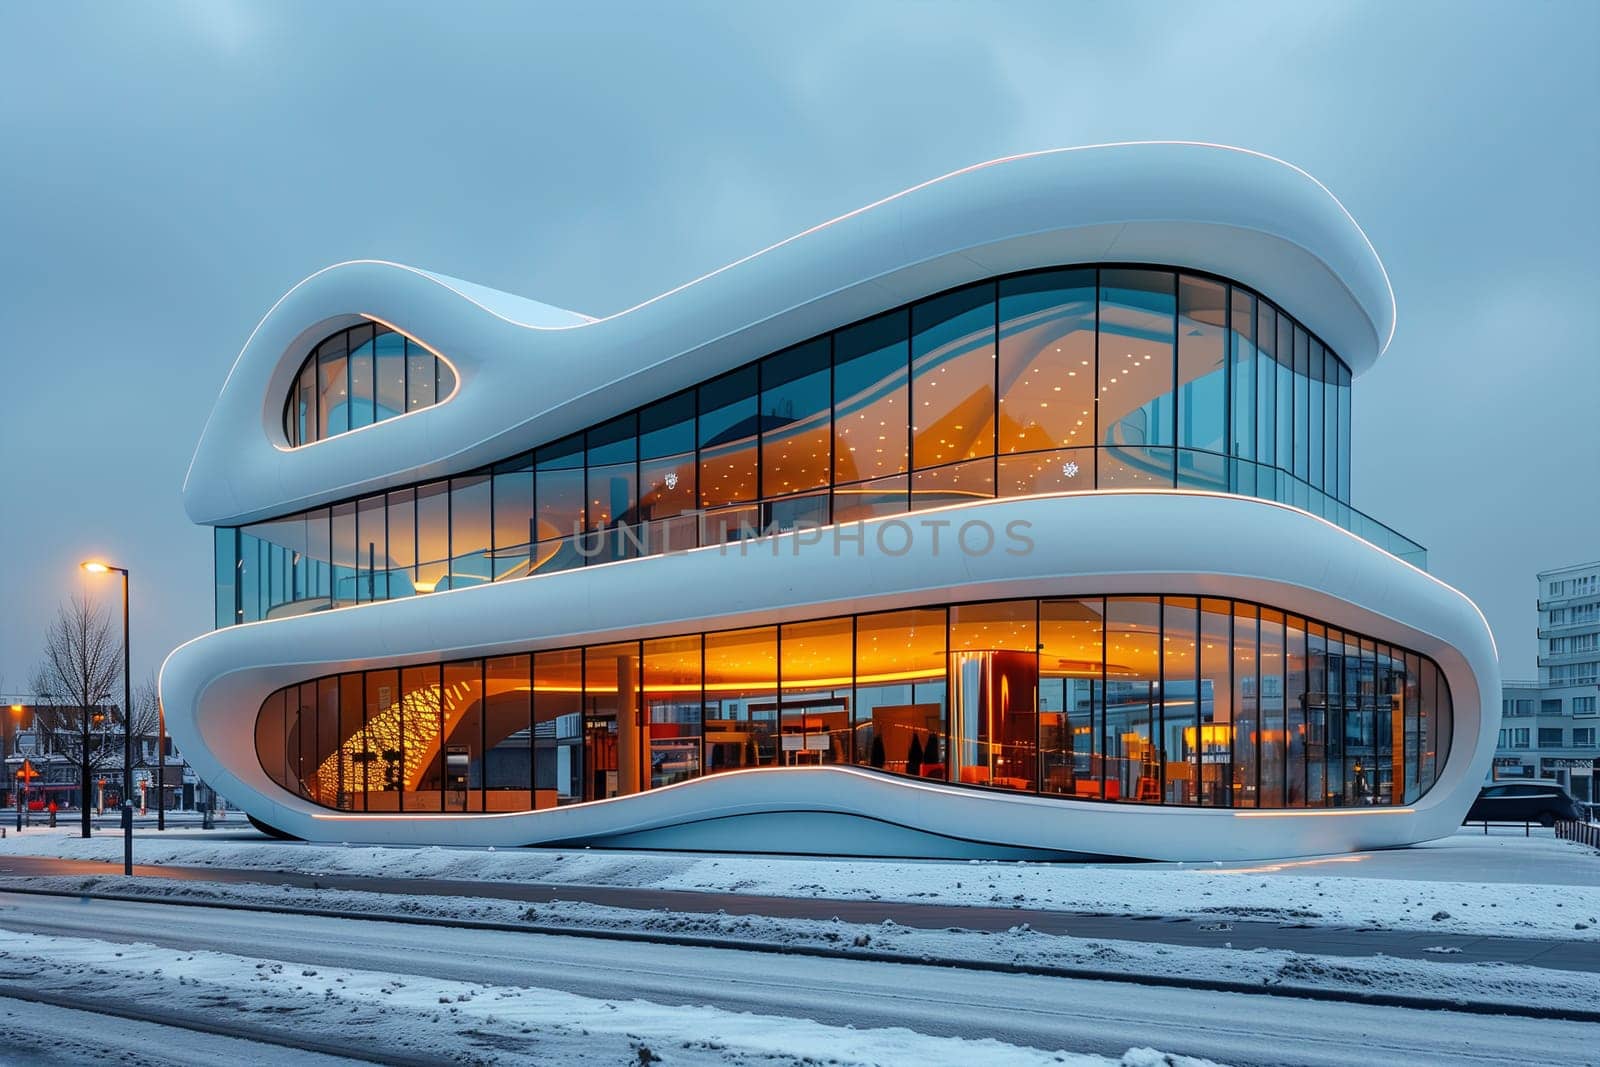 A building with a distinctive curved roof and numerous windows, creating a unique architectural design.